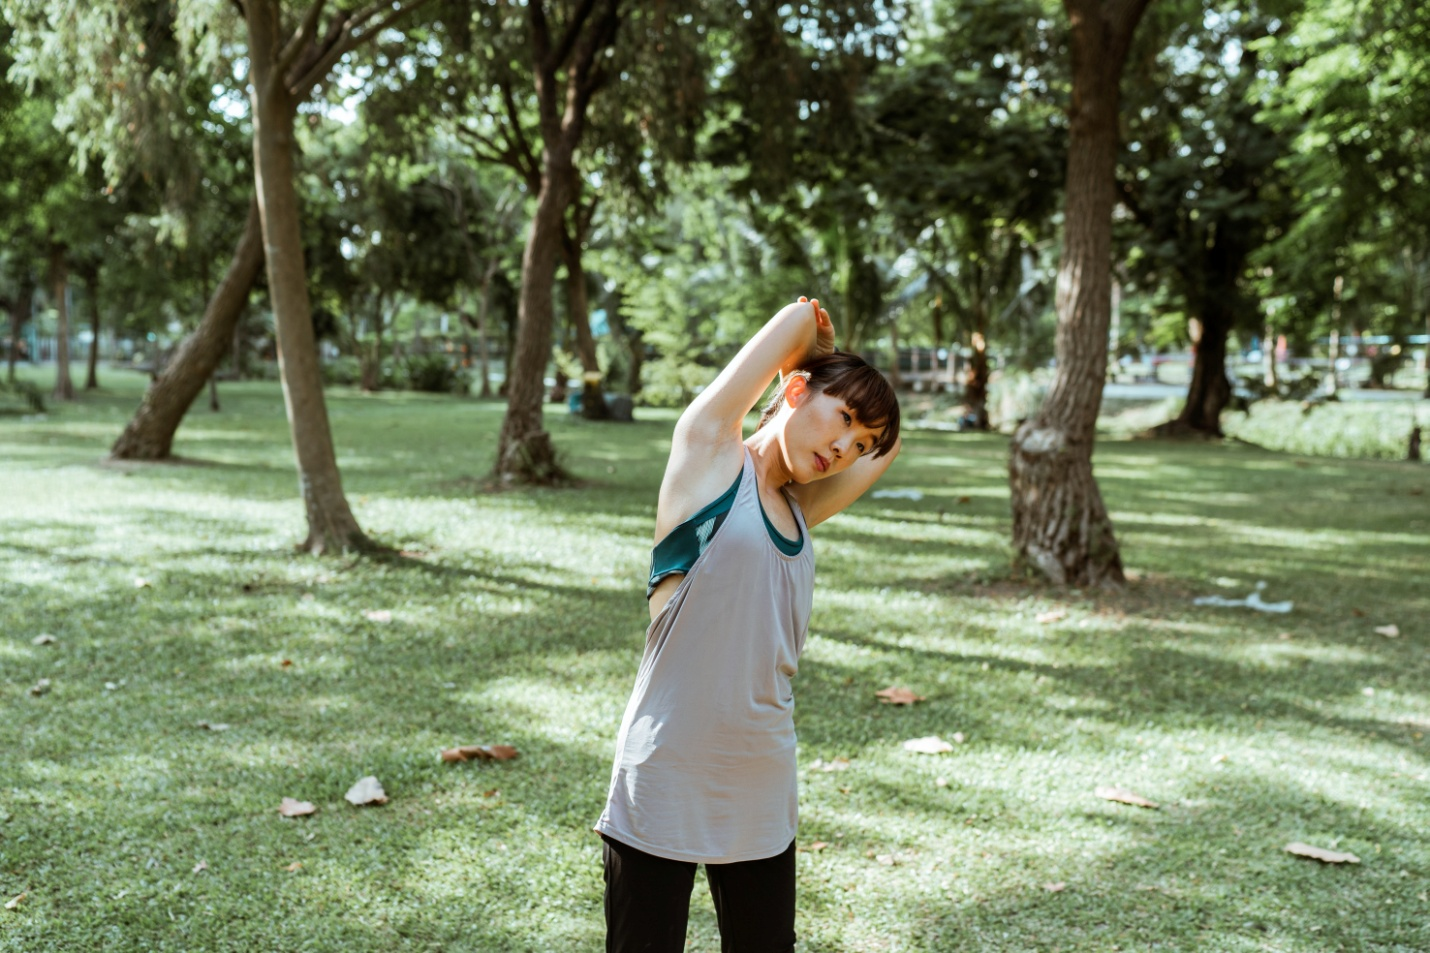 Woman stretching muscles of arm and back in park